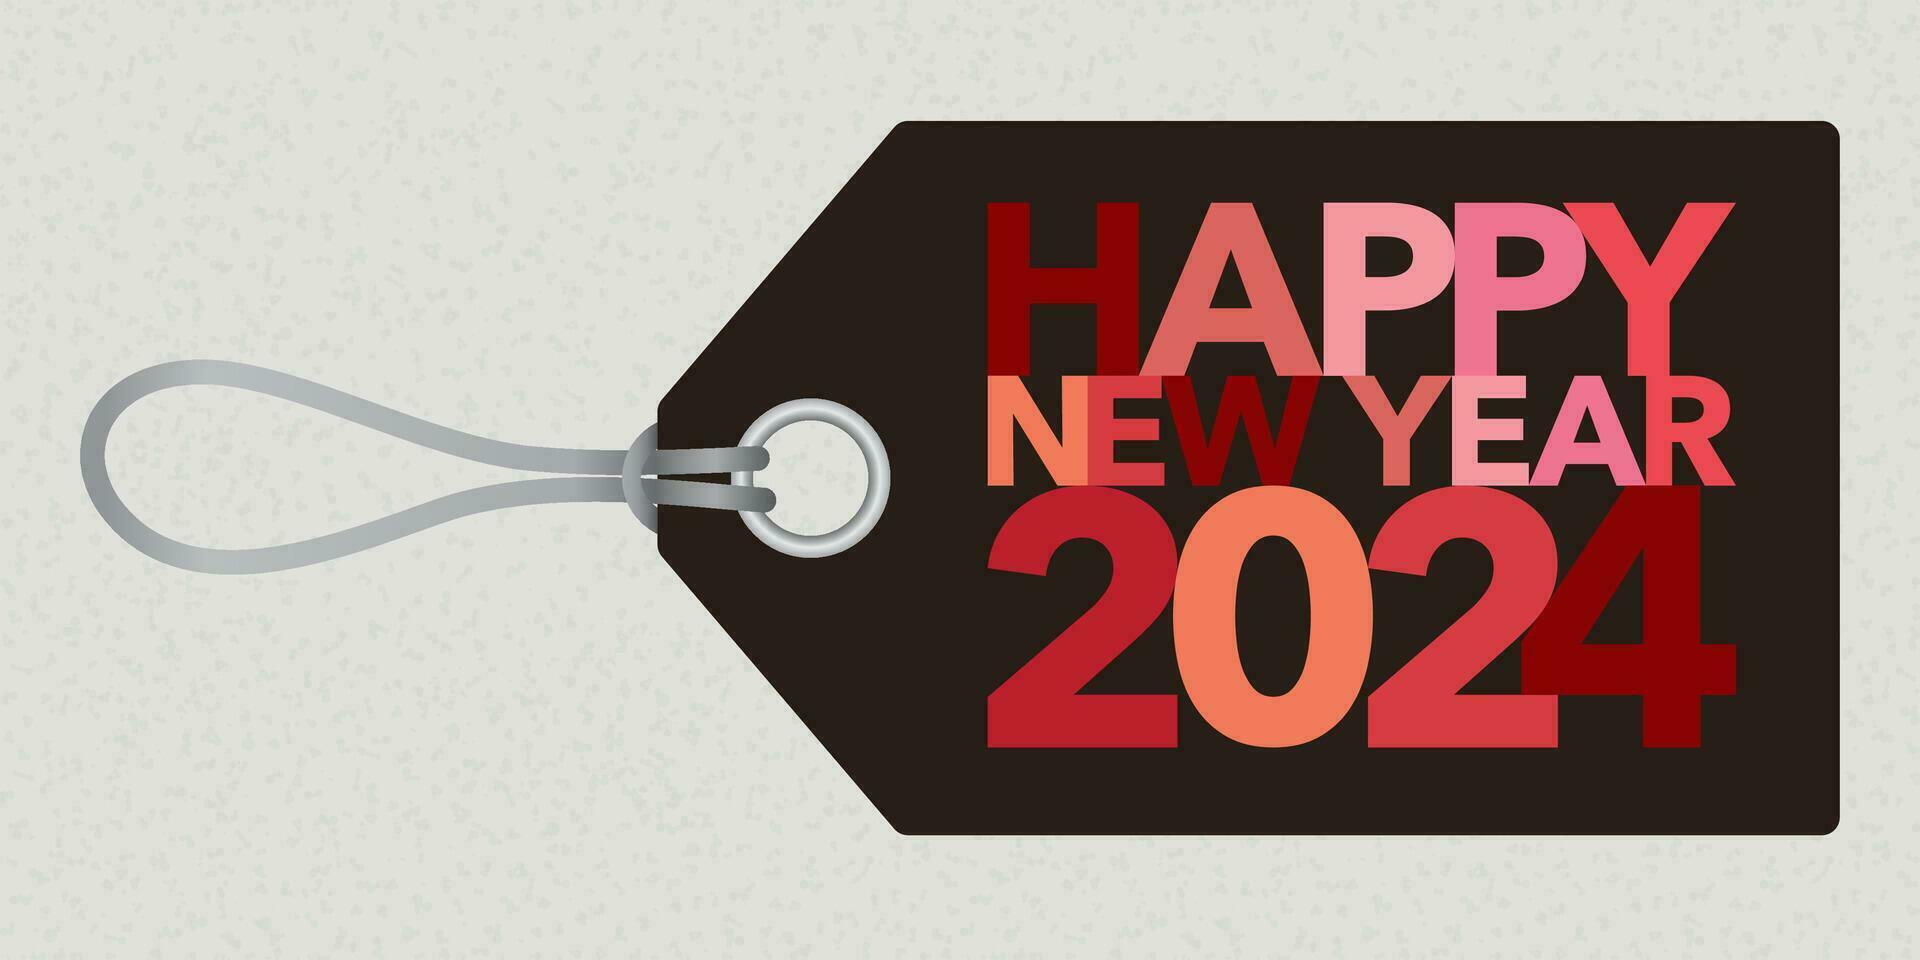 Colorful Happy New Year 2024 calligraphy on tag flat design vector illustration.